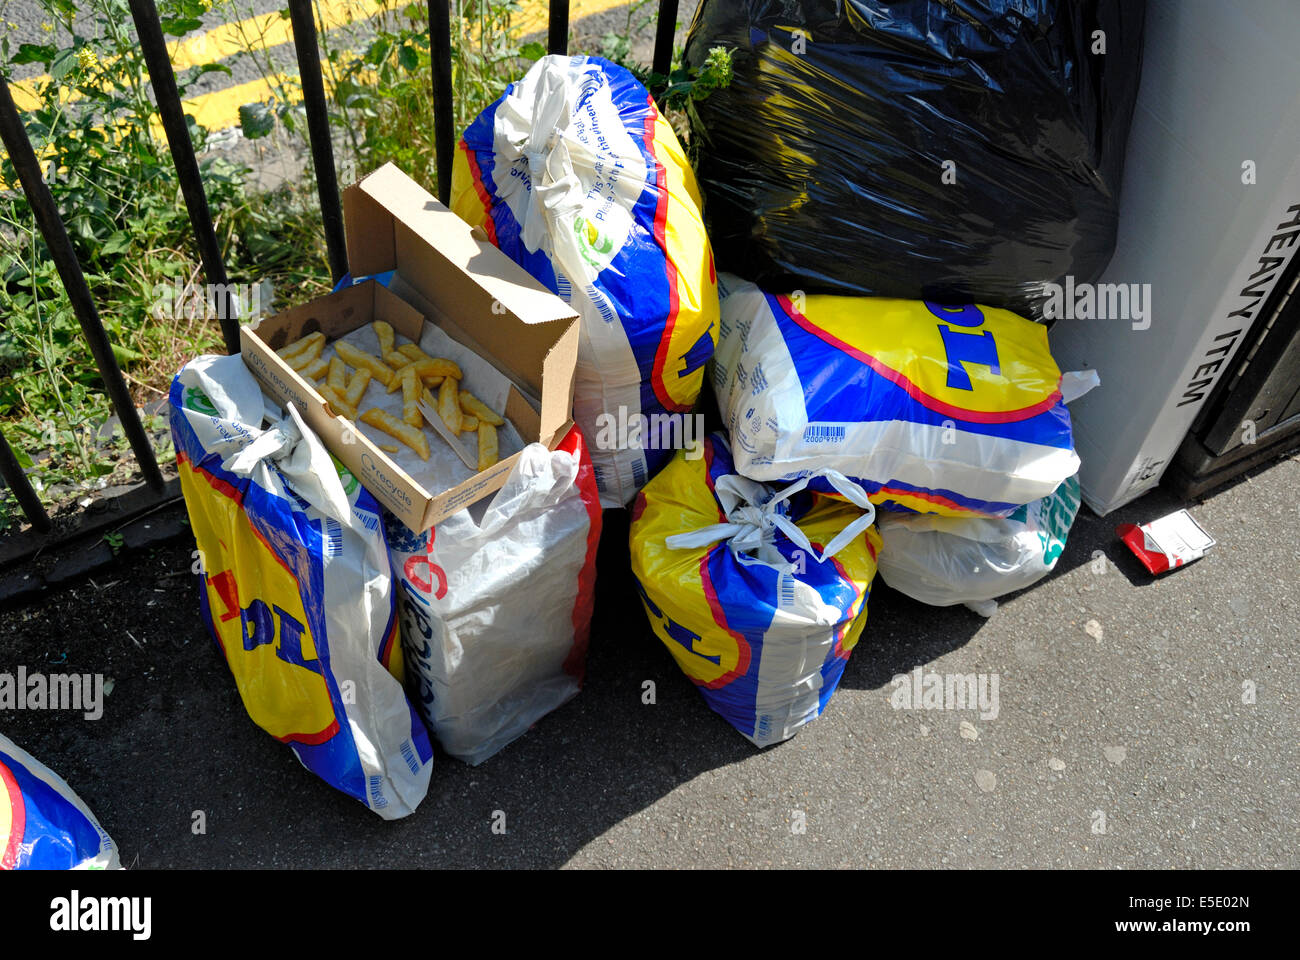 Maidstone, Kent, England. Rubbish left by a litter bin - Lidl shopping bags  Stock Photo - Alamy